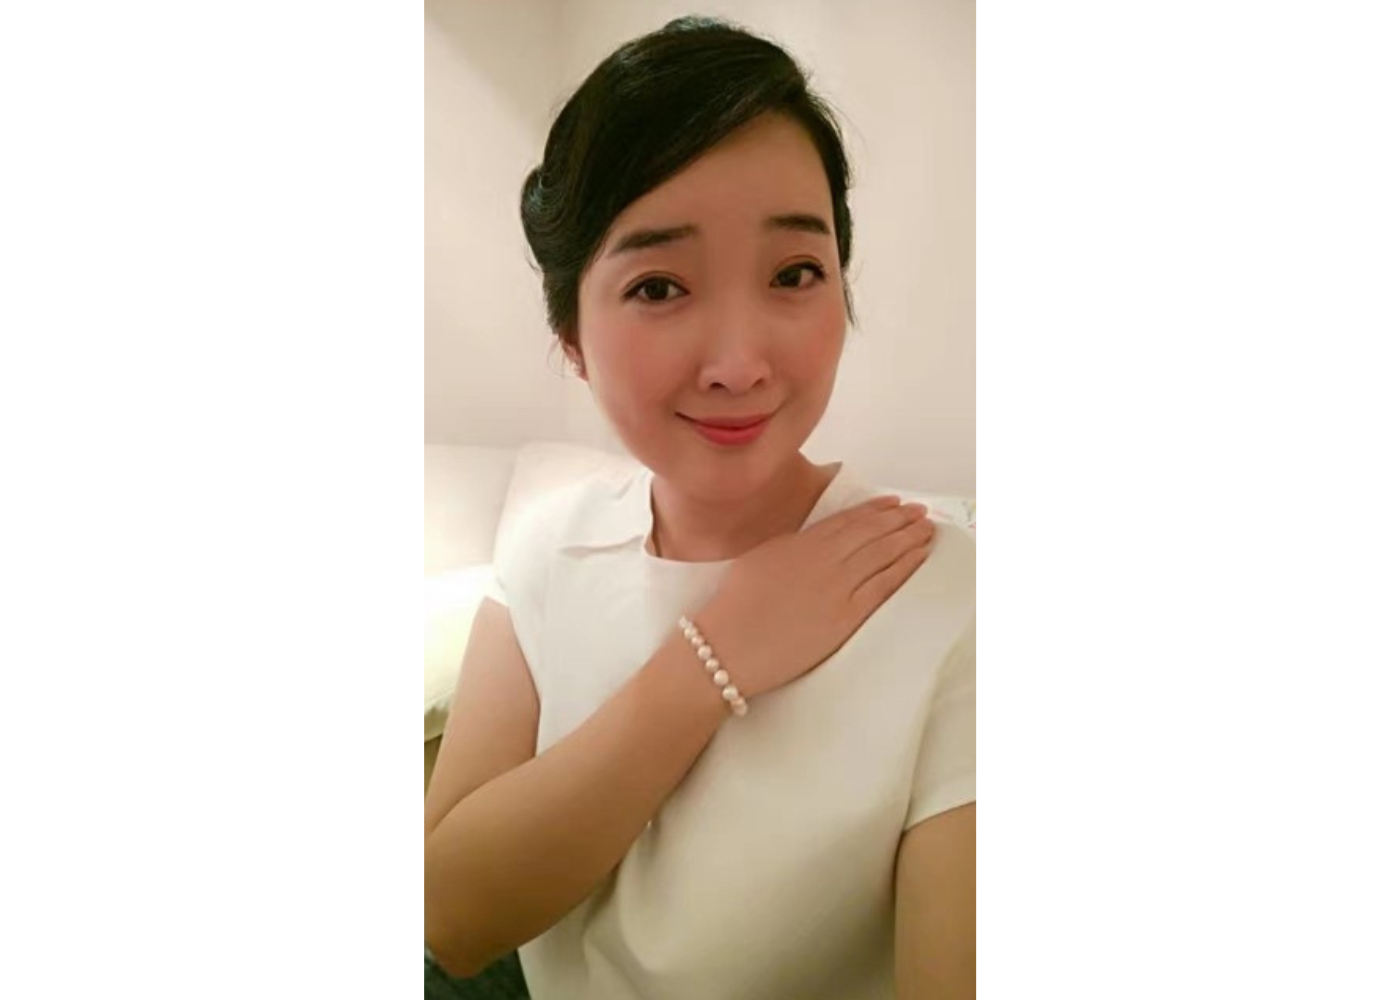 Limin Bai – ‘Academic Goals are Often the Precursor to a Successful, Satisfying Career’